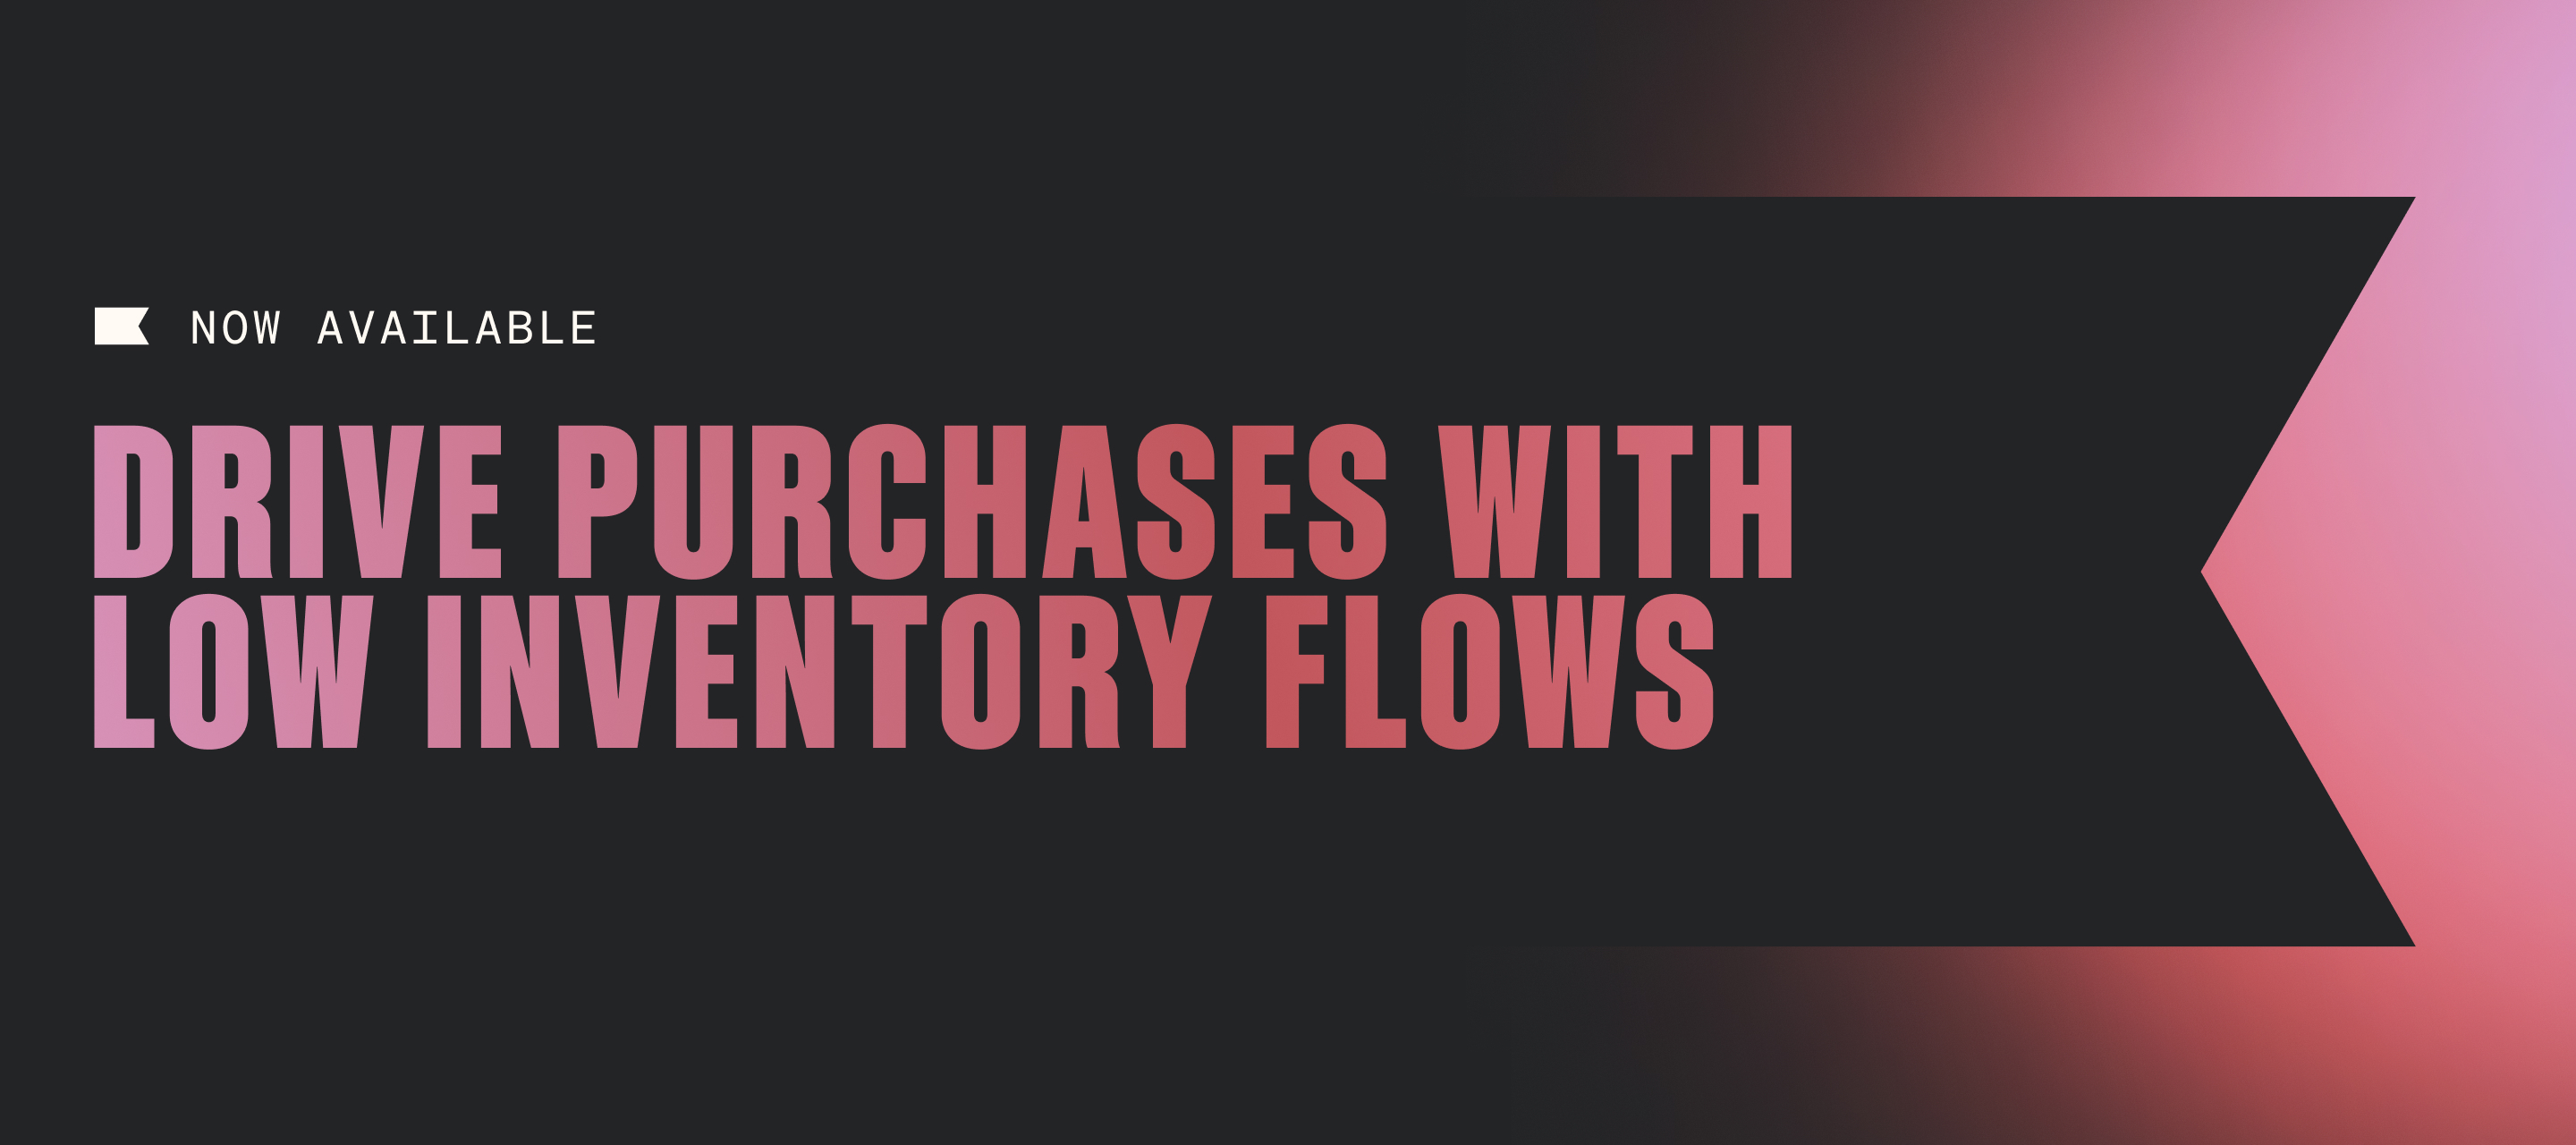 Drive purchases with low inventory flows